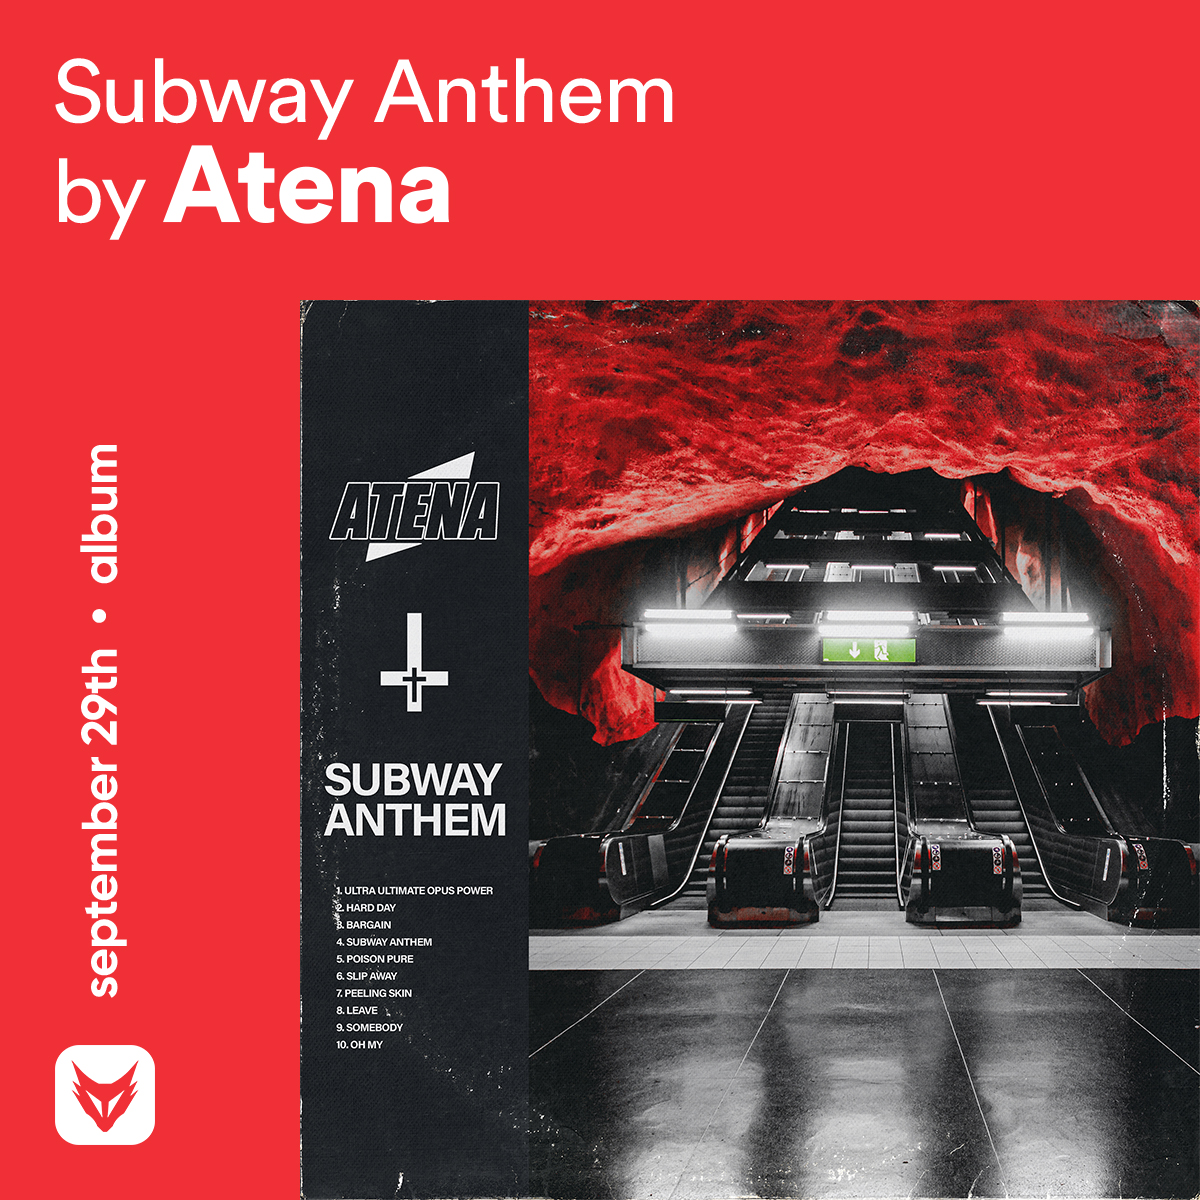 // @atenaband's fourth full-length album titled 'Subway Anthem' will be released on September 29th!

Tracklist:
1. Ultra Ultimate Opus Power
2. Hard Day
3. Bargain
4. Subway Anthem
5. Poison Pure
6. Slip Away
7. Peeling Skin
8. Leave
9. Somebody
10. Oh My